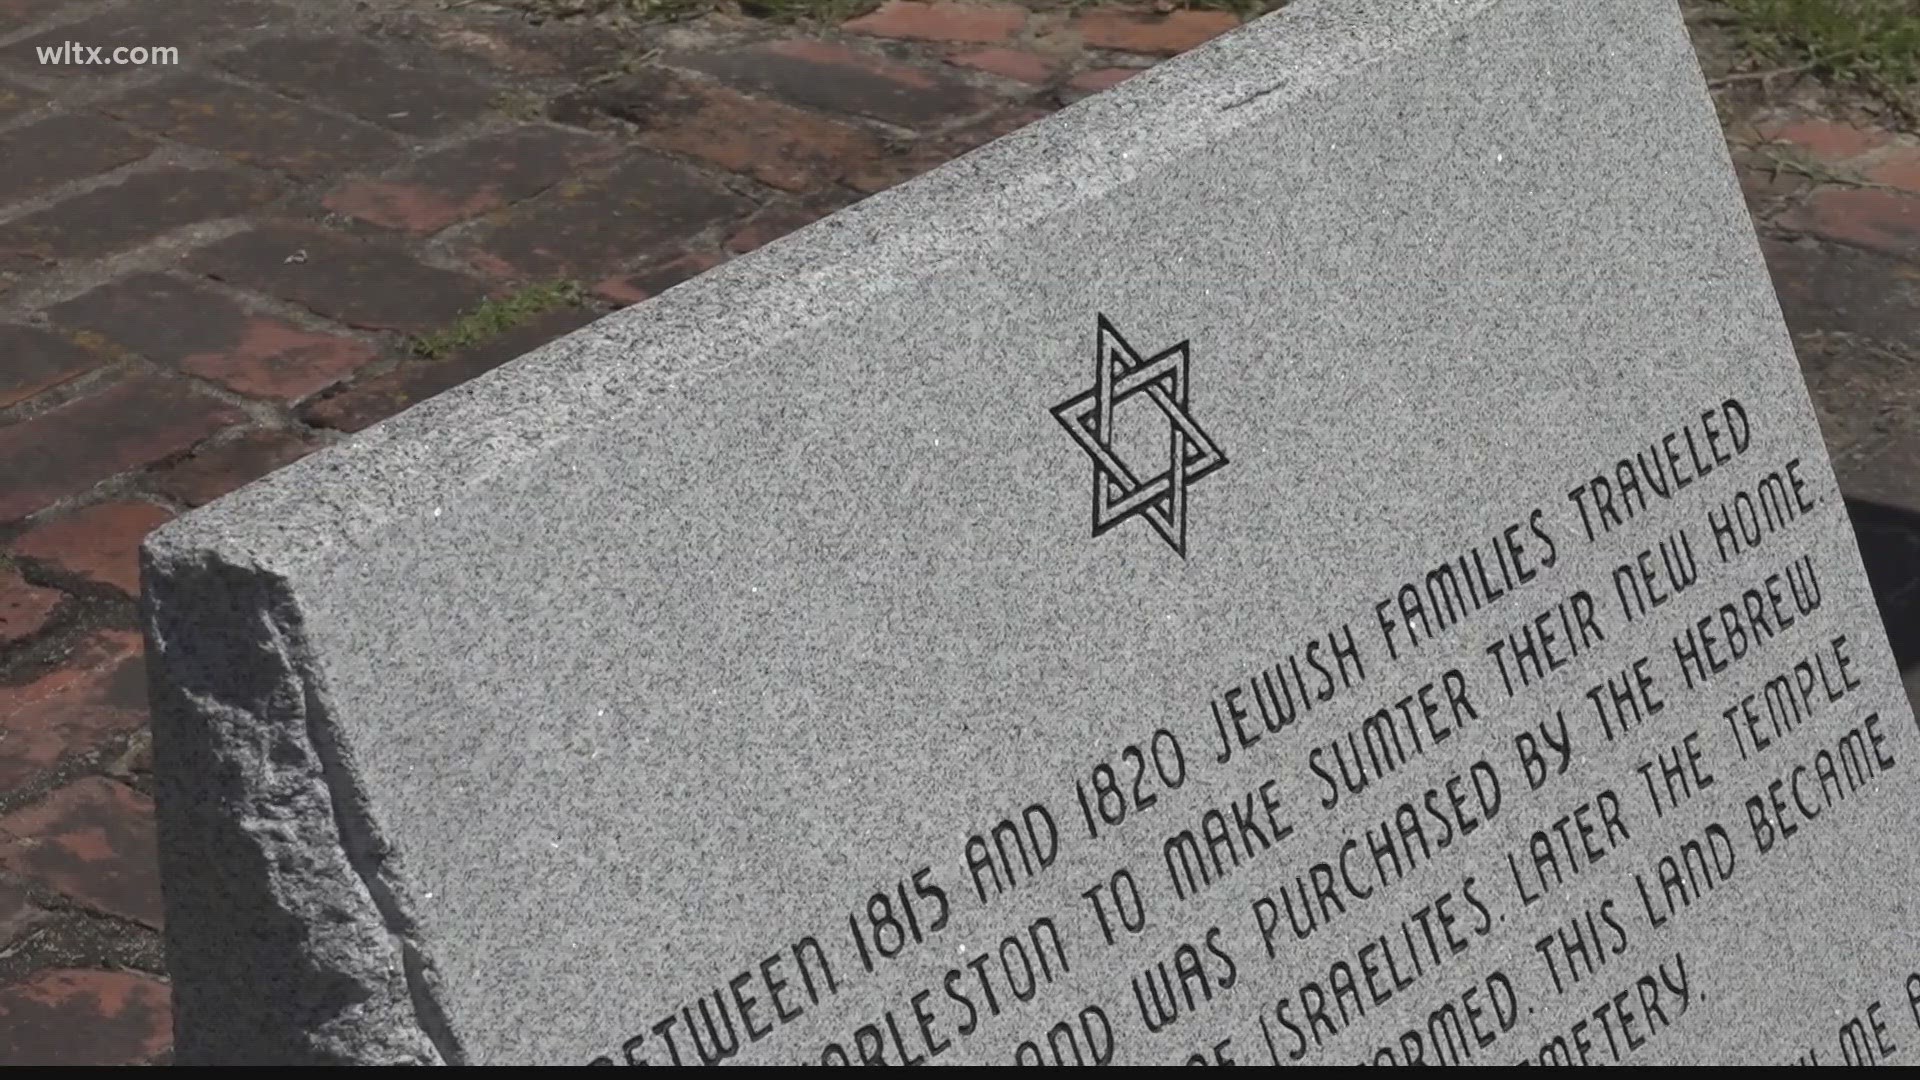 The Temple Sinai Jewish Cemetery started as two acres in Sumter in 1874. Now, it's expanded to ten acres where 555 people are buried.